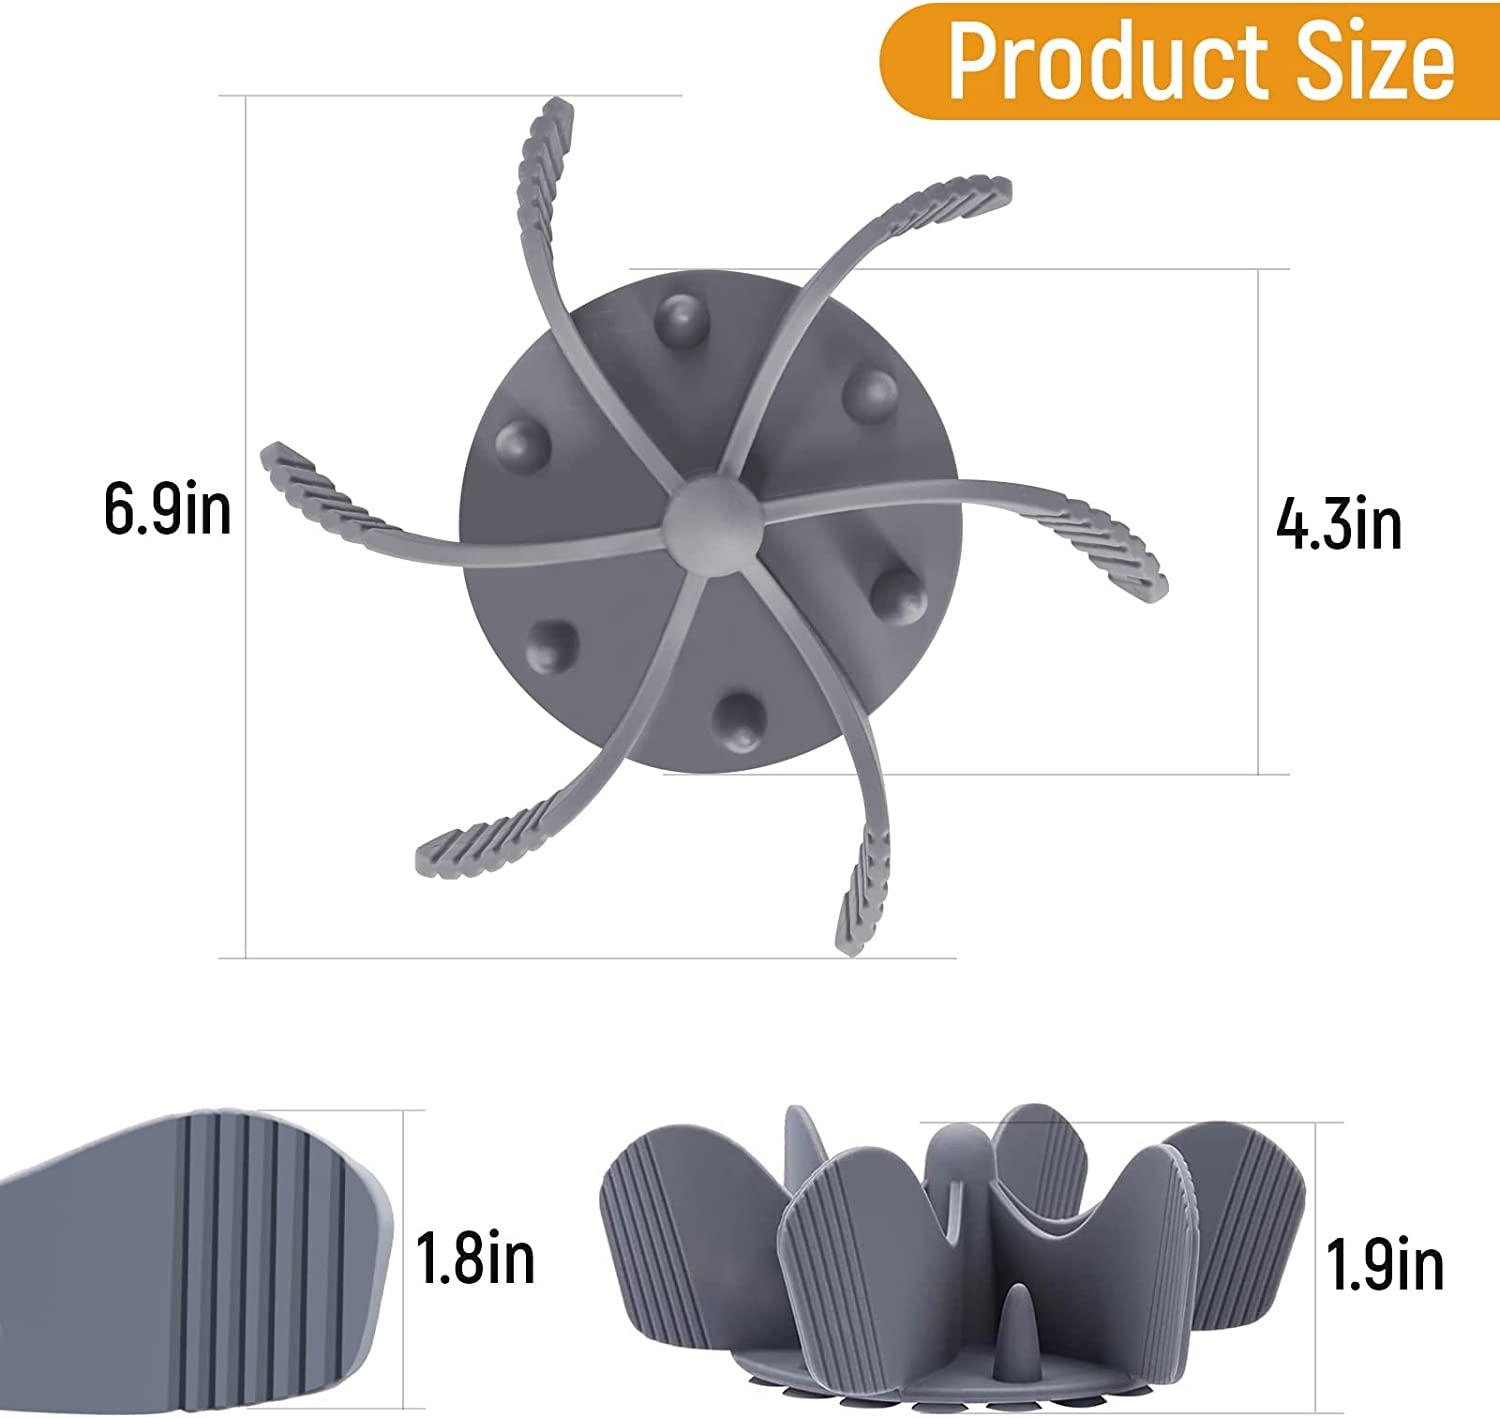 Silicone Slow Feeder Dog Bowl Insert - Dog Puzzle Feeder with Suction Cups - Cuttable Fit for All Dog Food Bowls Slow Feeder Insert Gray